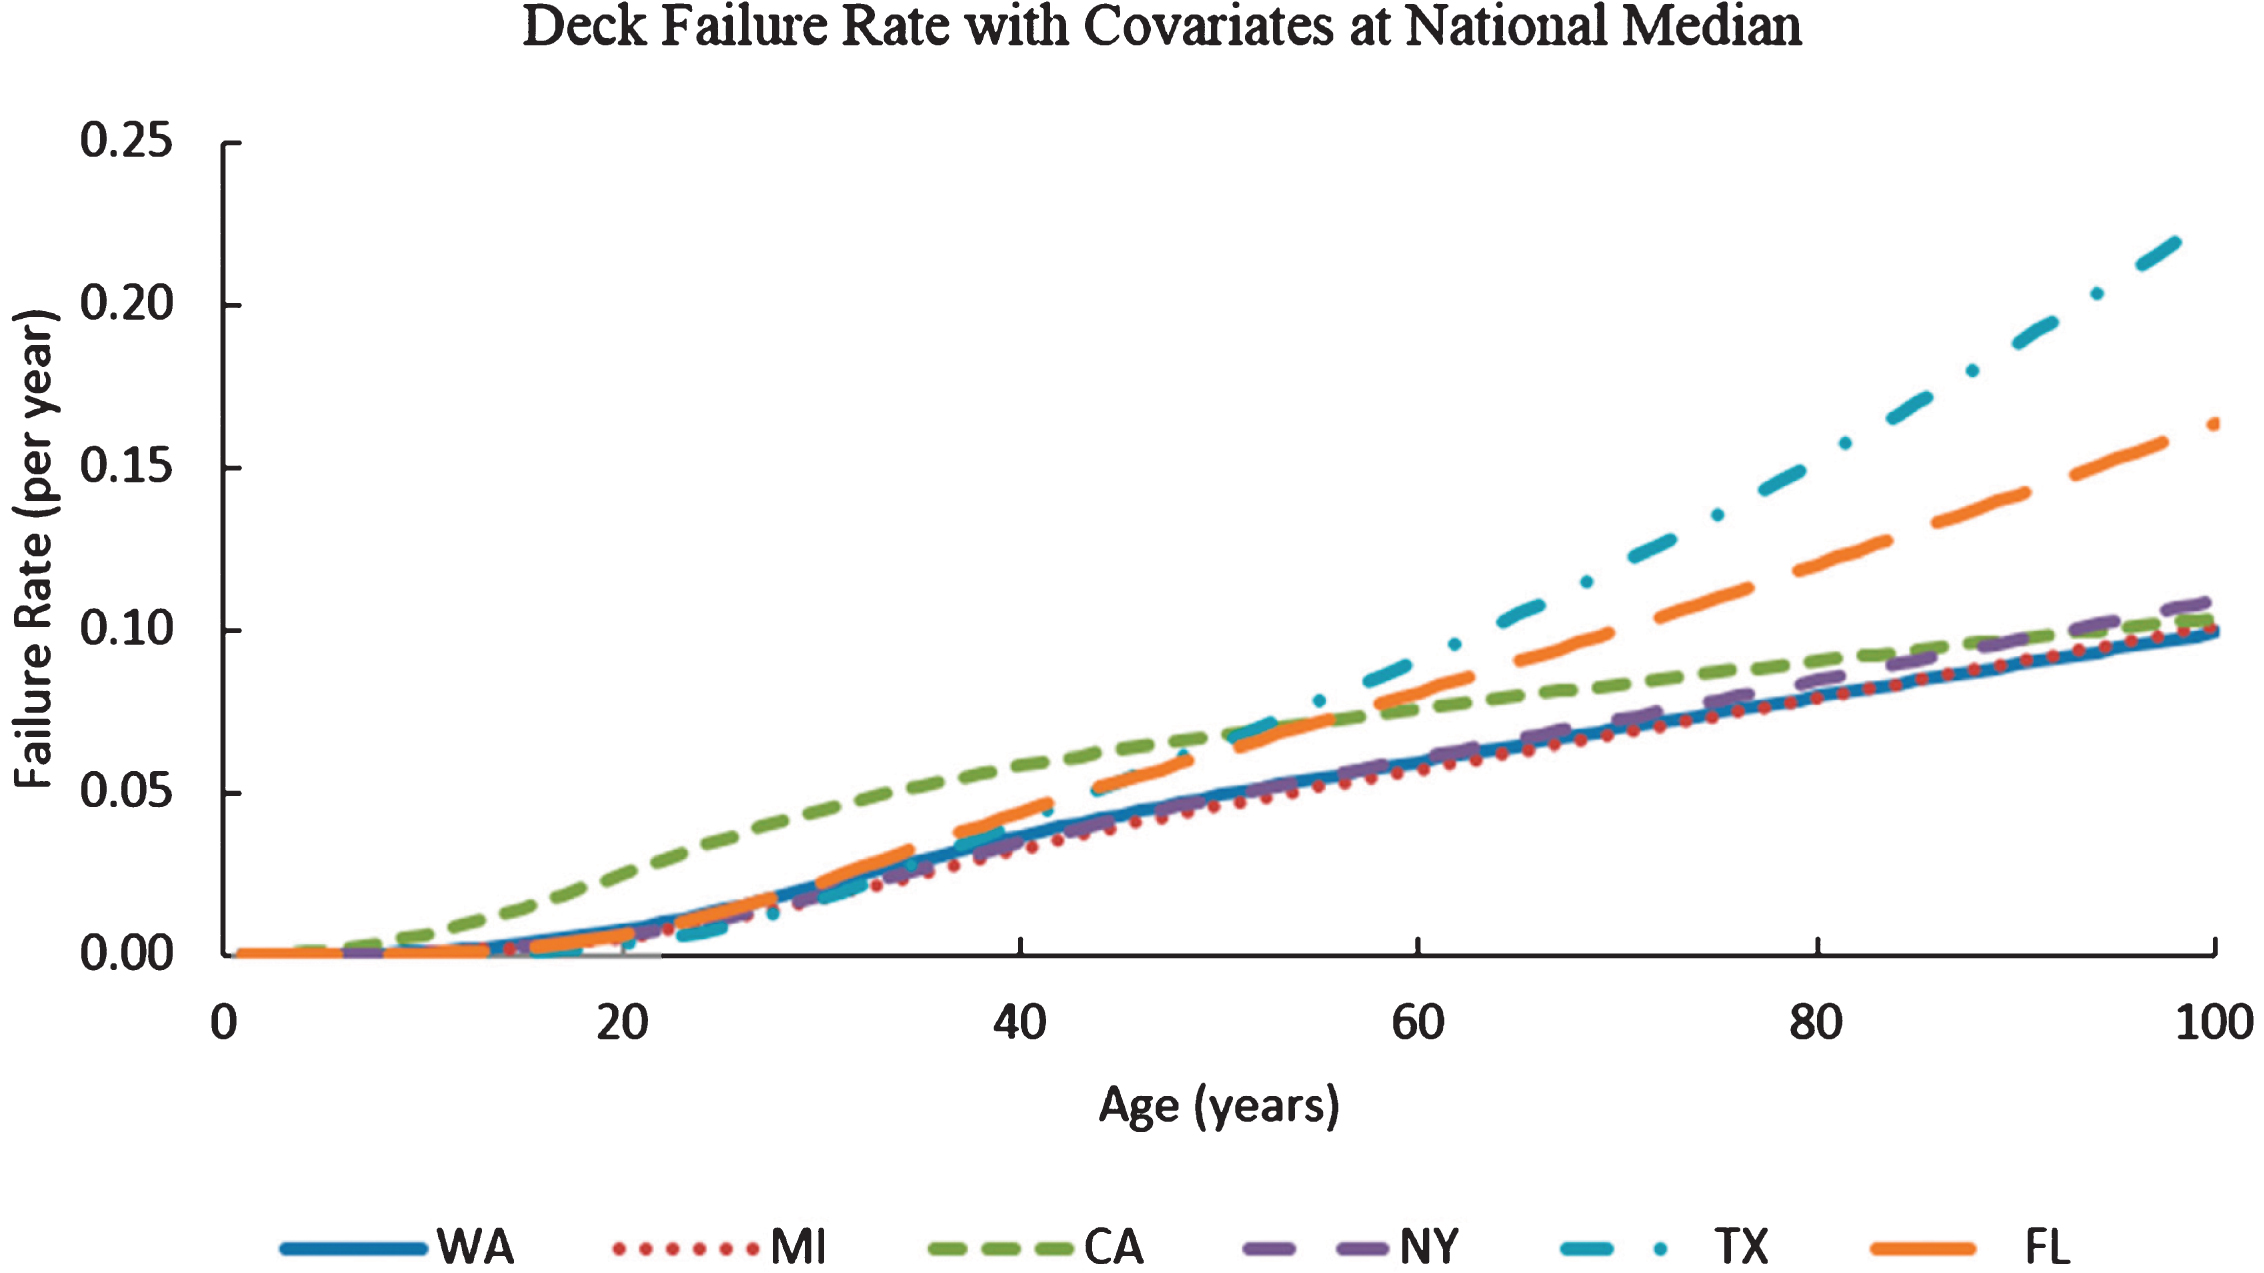 Variation of deck failure rates with age for Washington State, California, Michigan, Florida, Texas, and New York with ADT and deck areas at national median (ADT = 1703 and deck area = 355.3 m2).